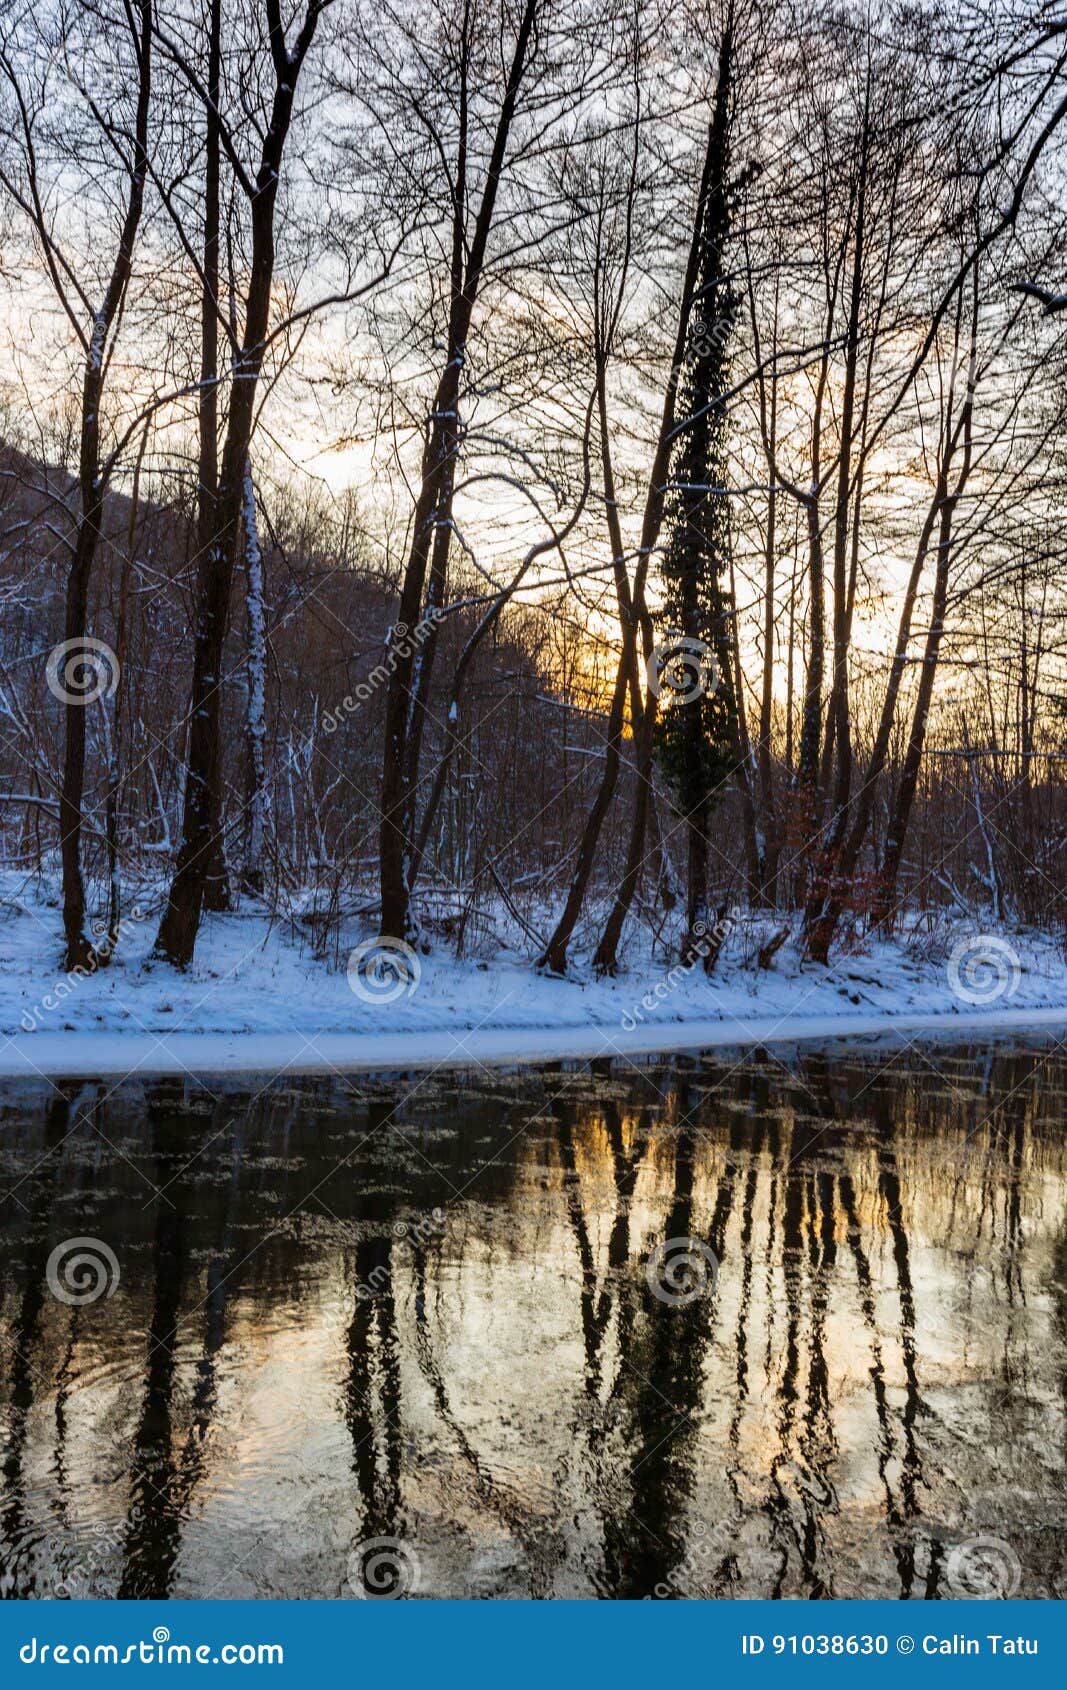 Sunset In The Neighborhood And Reflections In The River Stock Photo,  Picture and Royalty Free Image. Image 96533227.